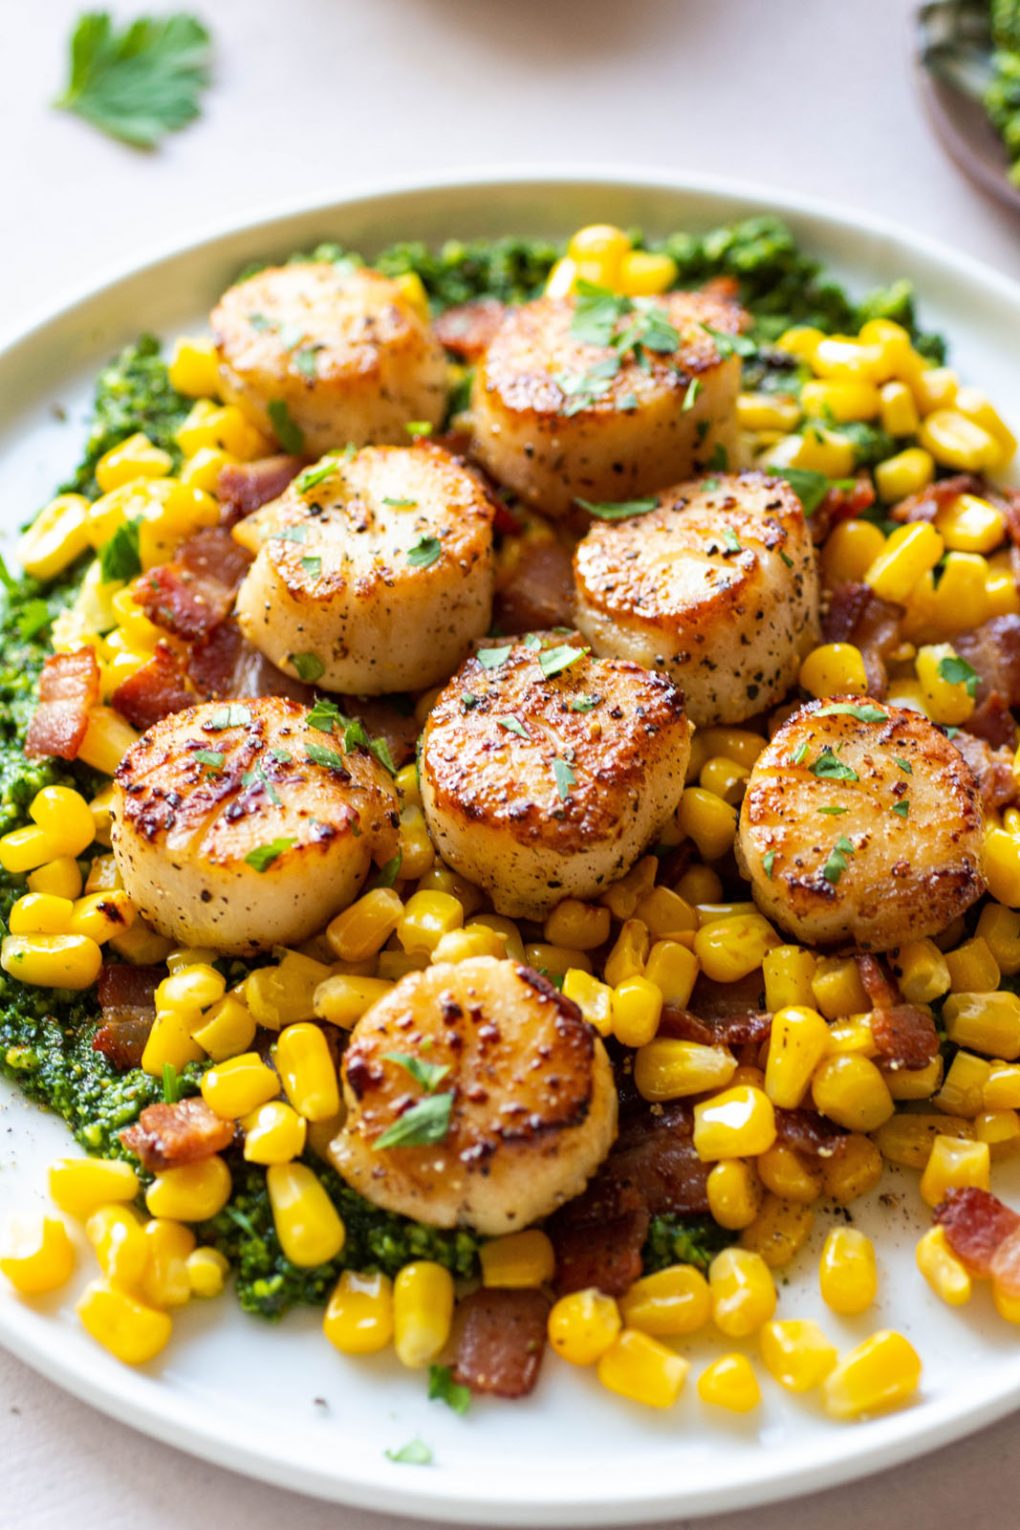 Side angle shot of perfectly seared scallops over a corn and bacon saute and kale pesto. On a round white plate placed on a light colored background.